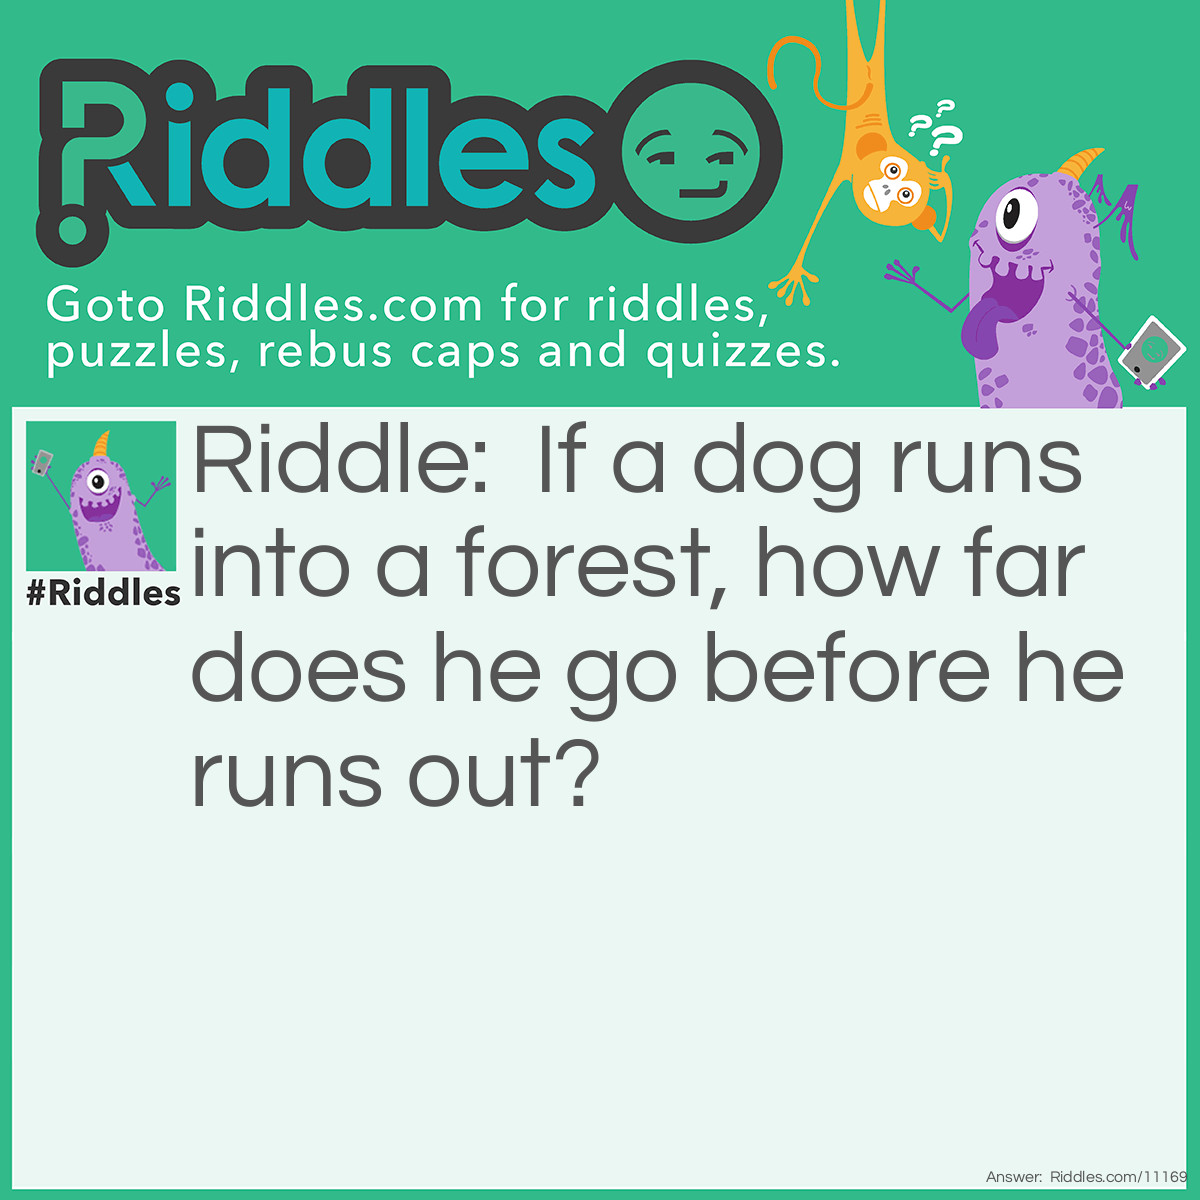 Riddle: If a dog runs into a forest, how far does he go before he runs out? Answer: Halfway.